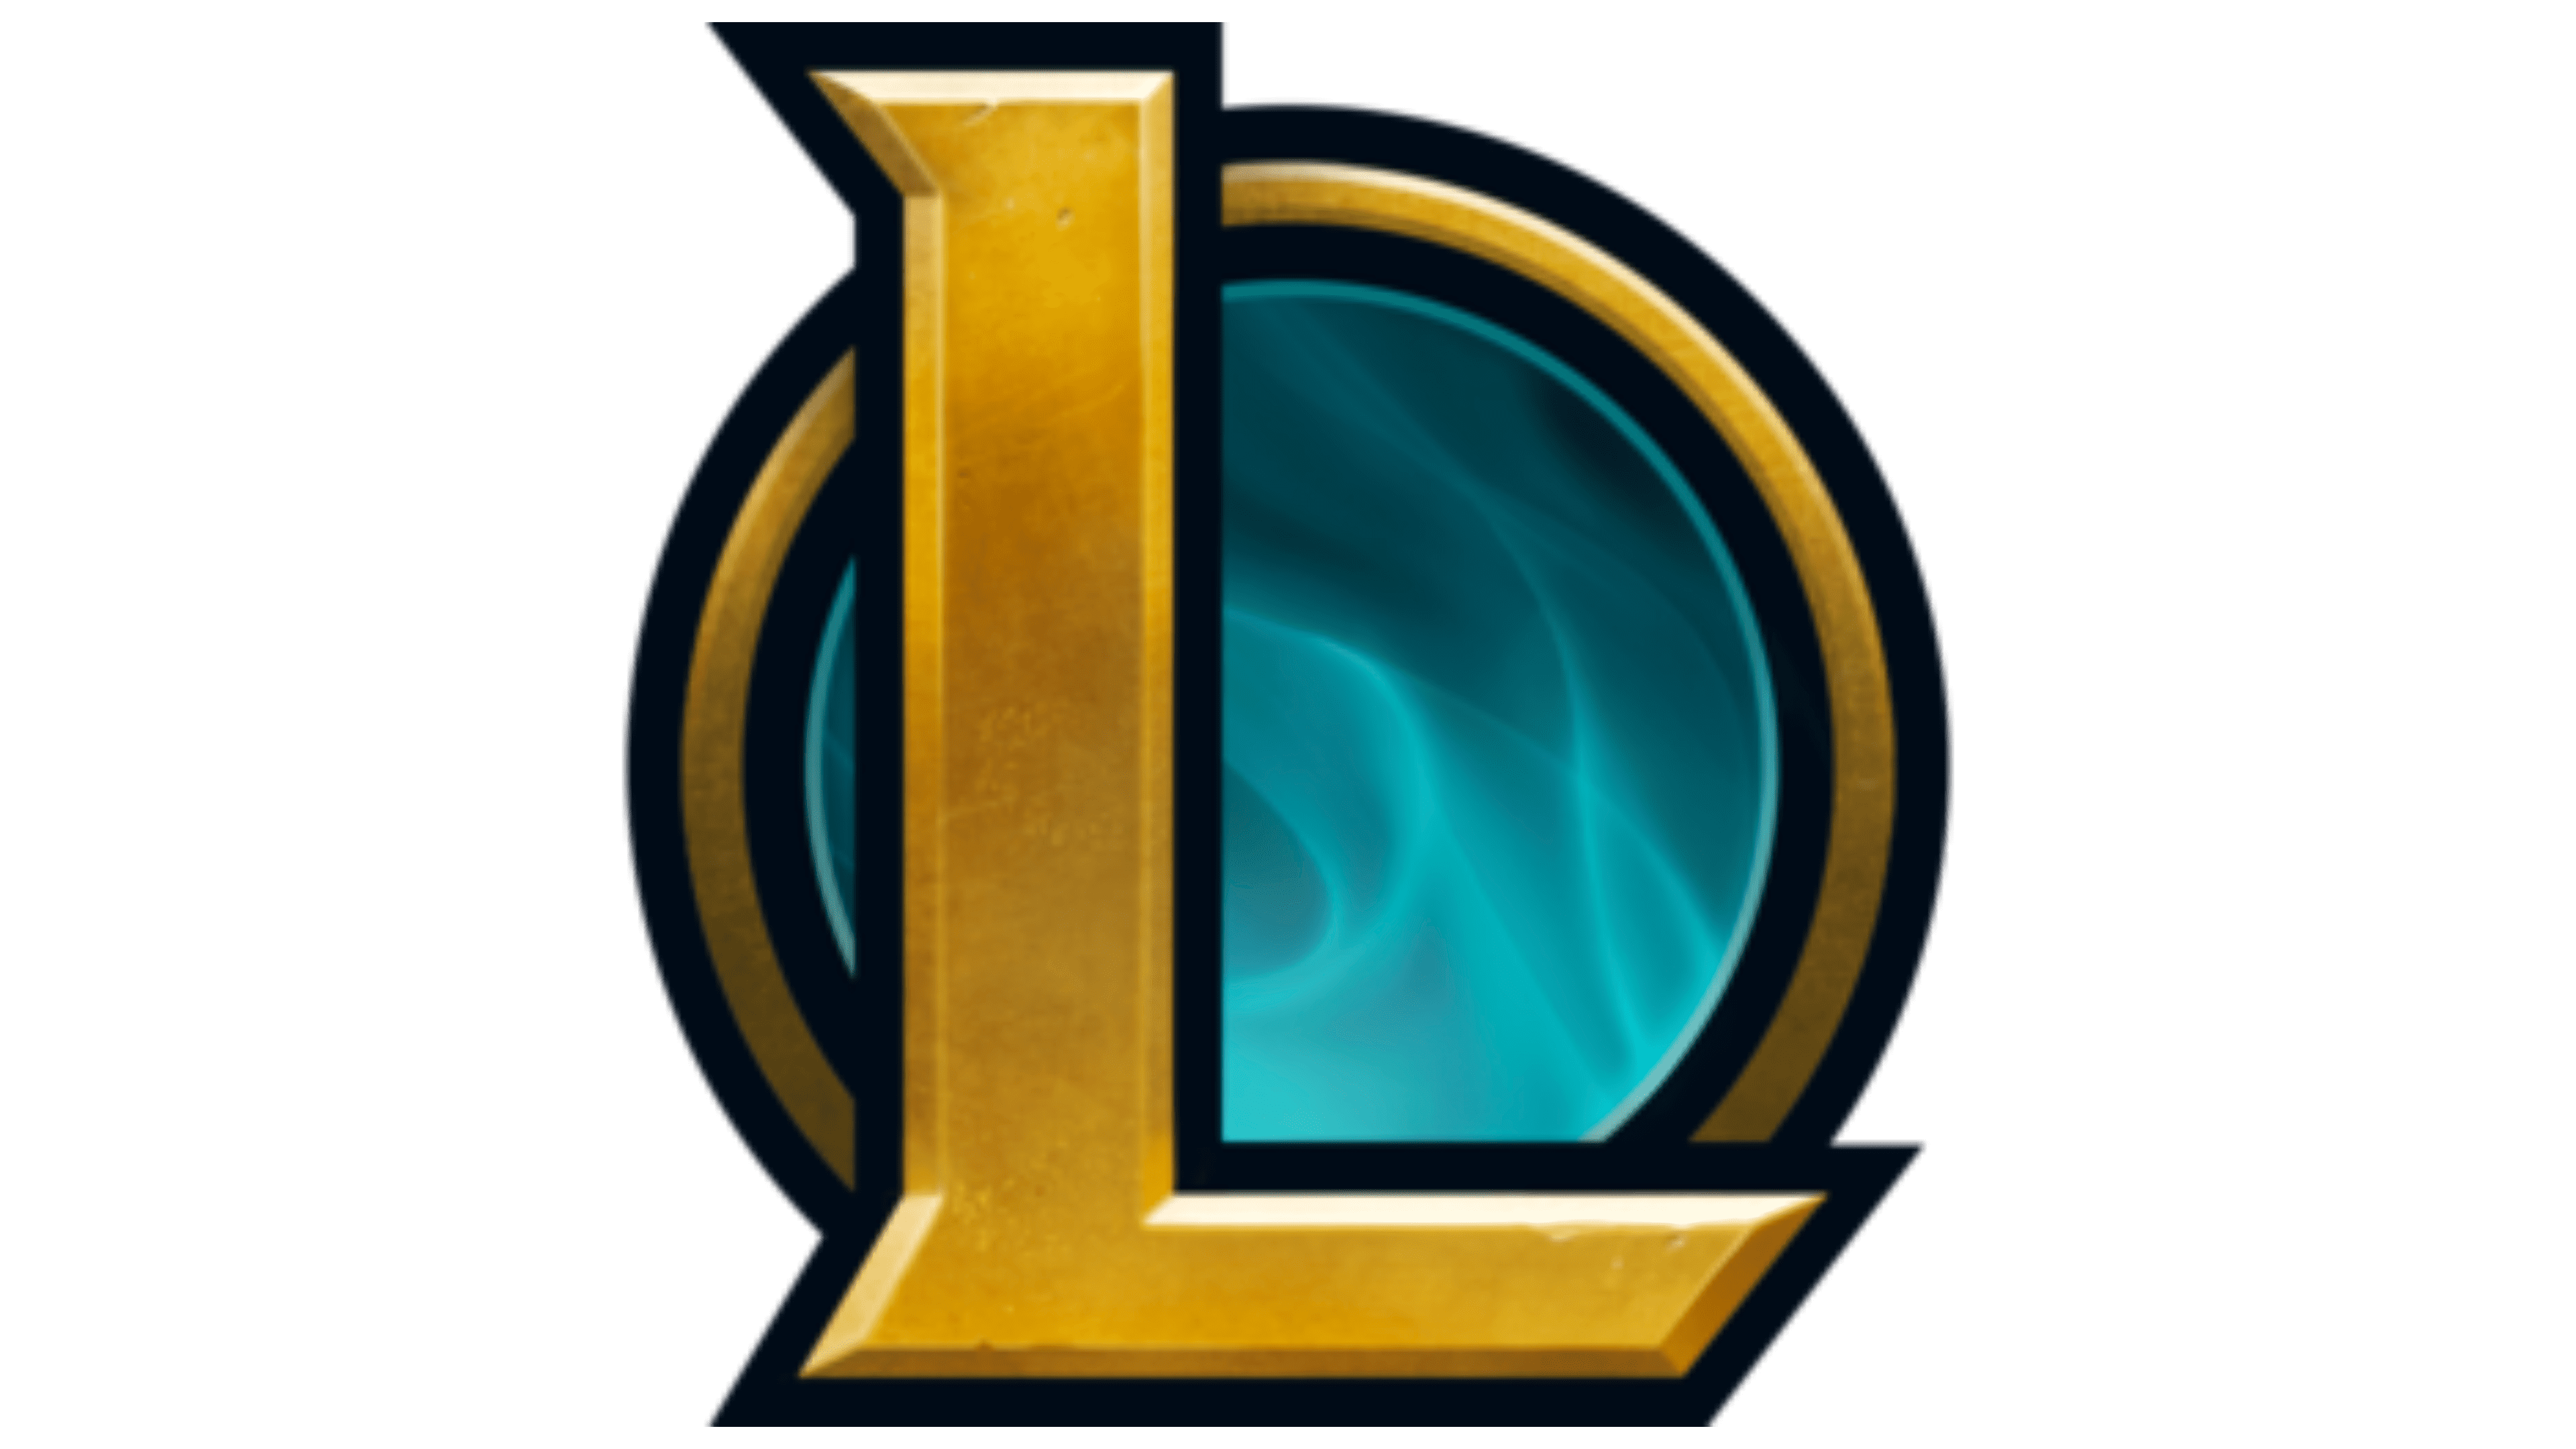 League of Legends Logo, meaning, history, PNG, SVG, vector